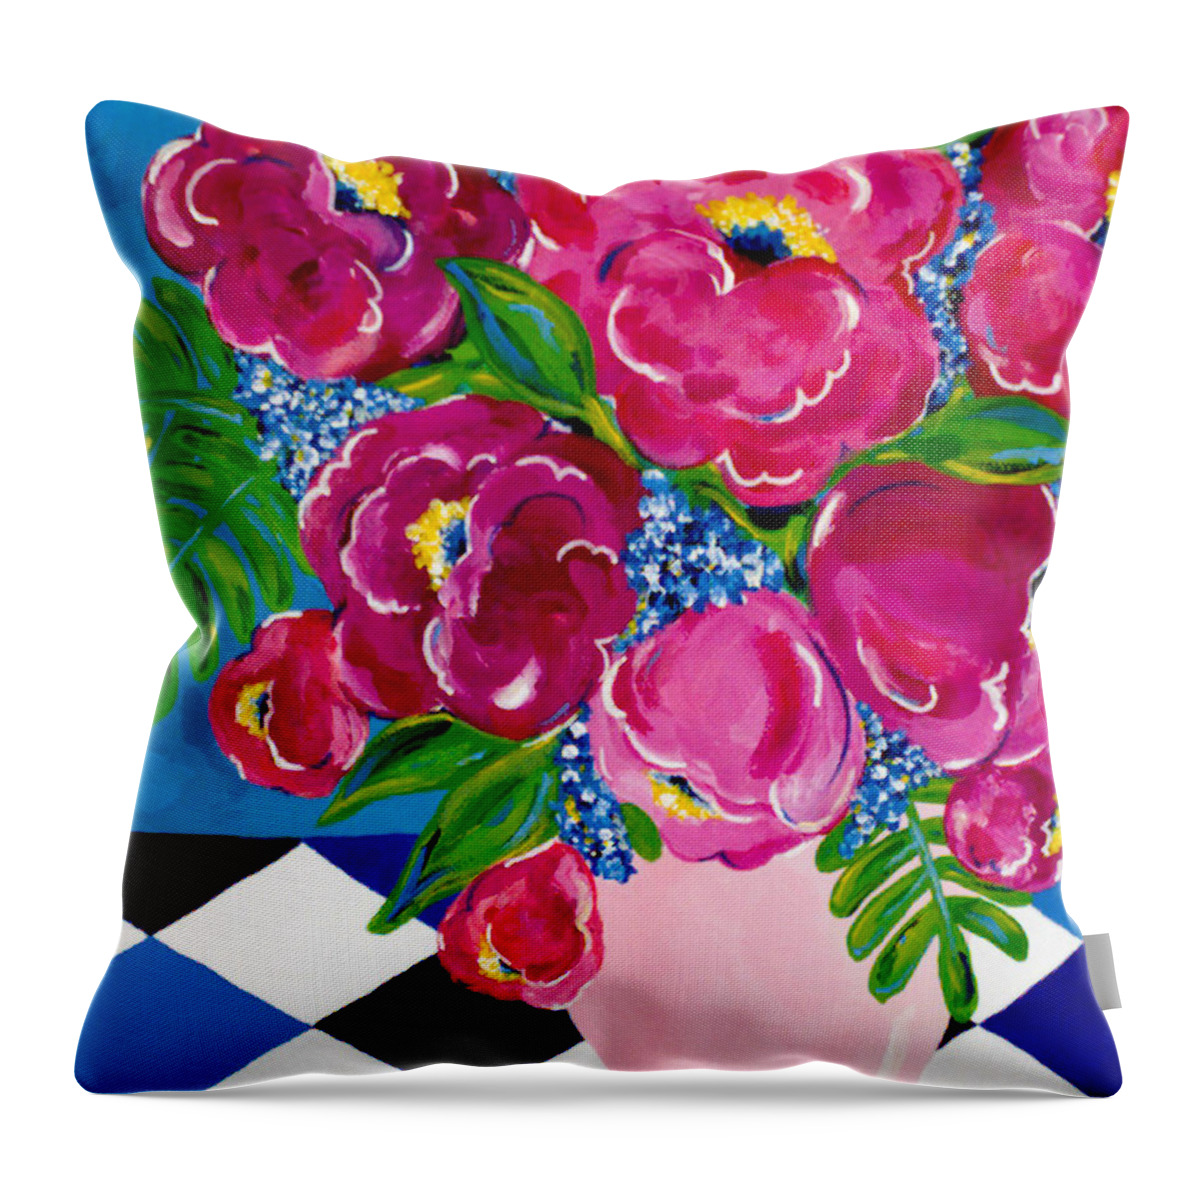 Floral Throw Pillow featuring the painting Pale Pink Vase by Beth Ann Scott